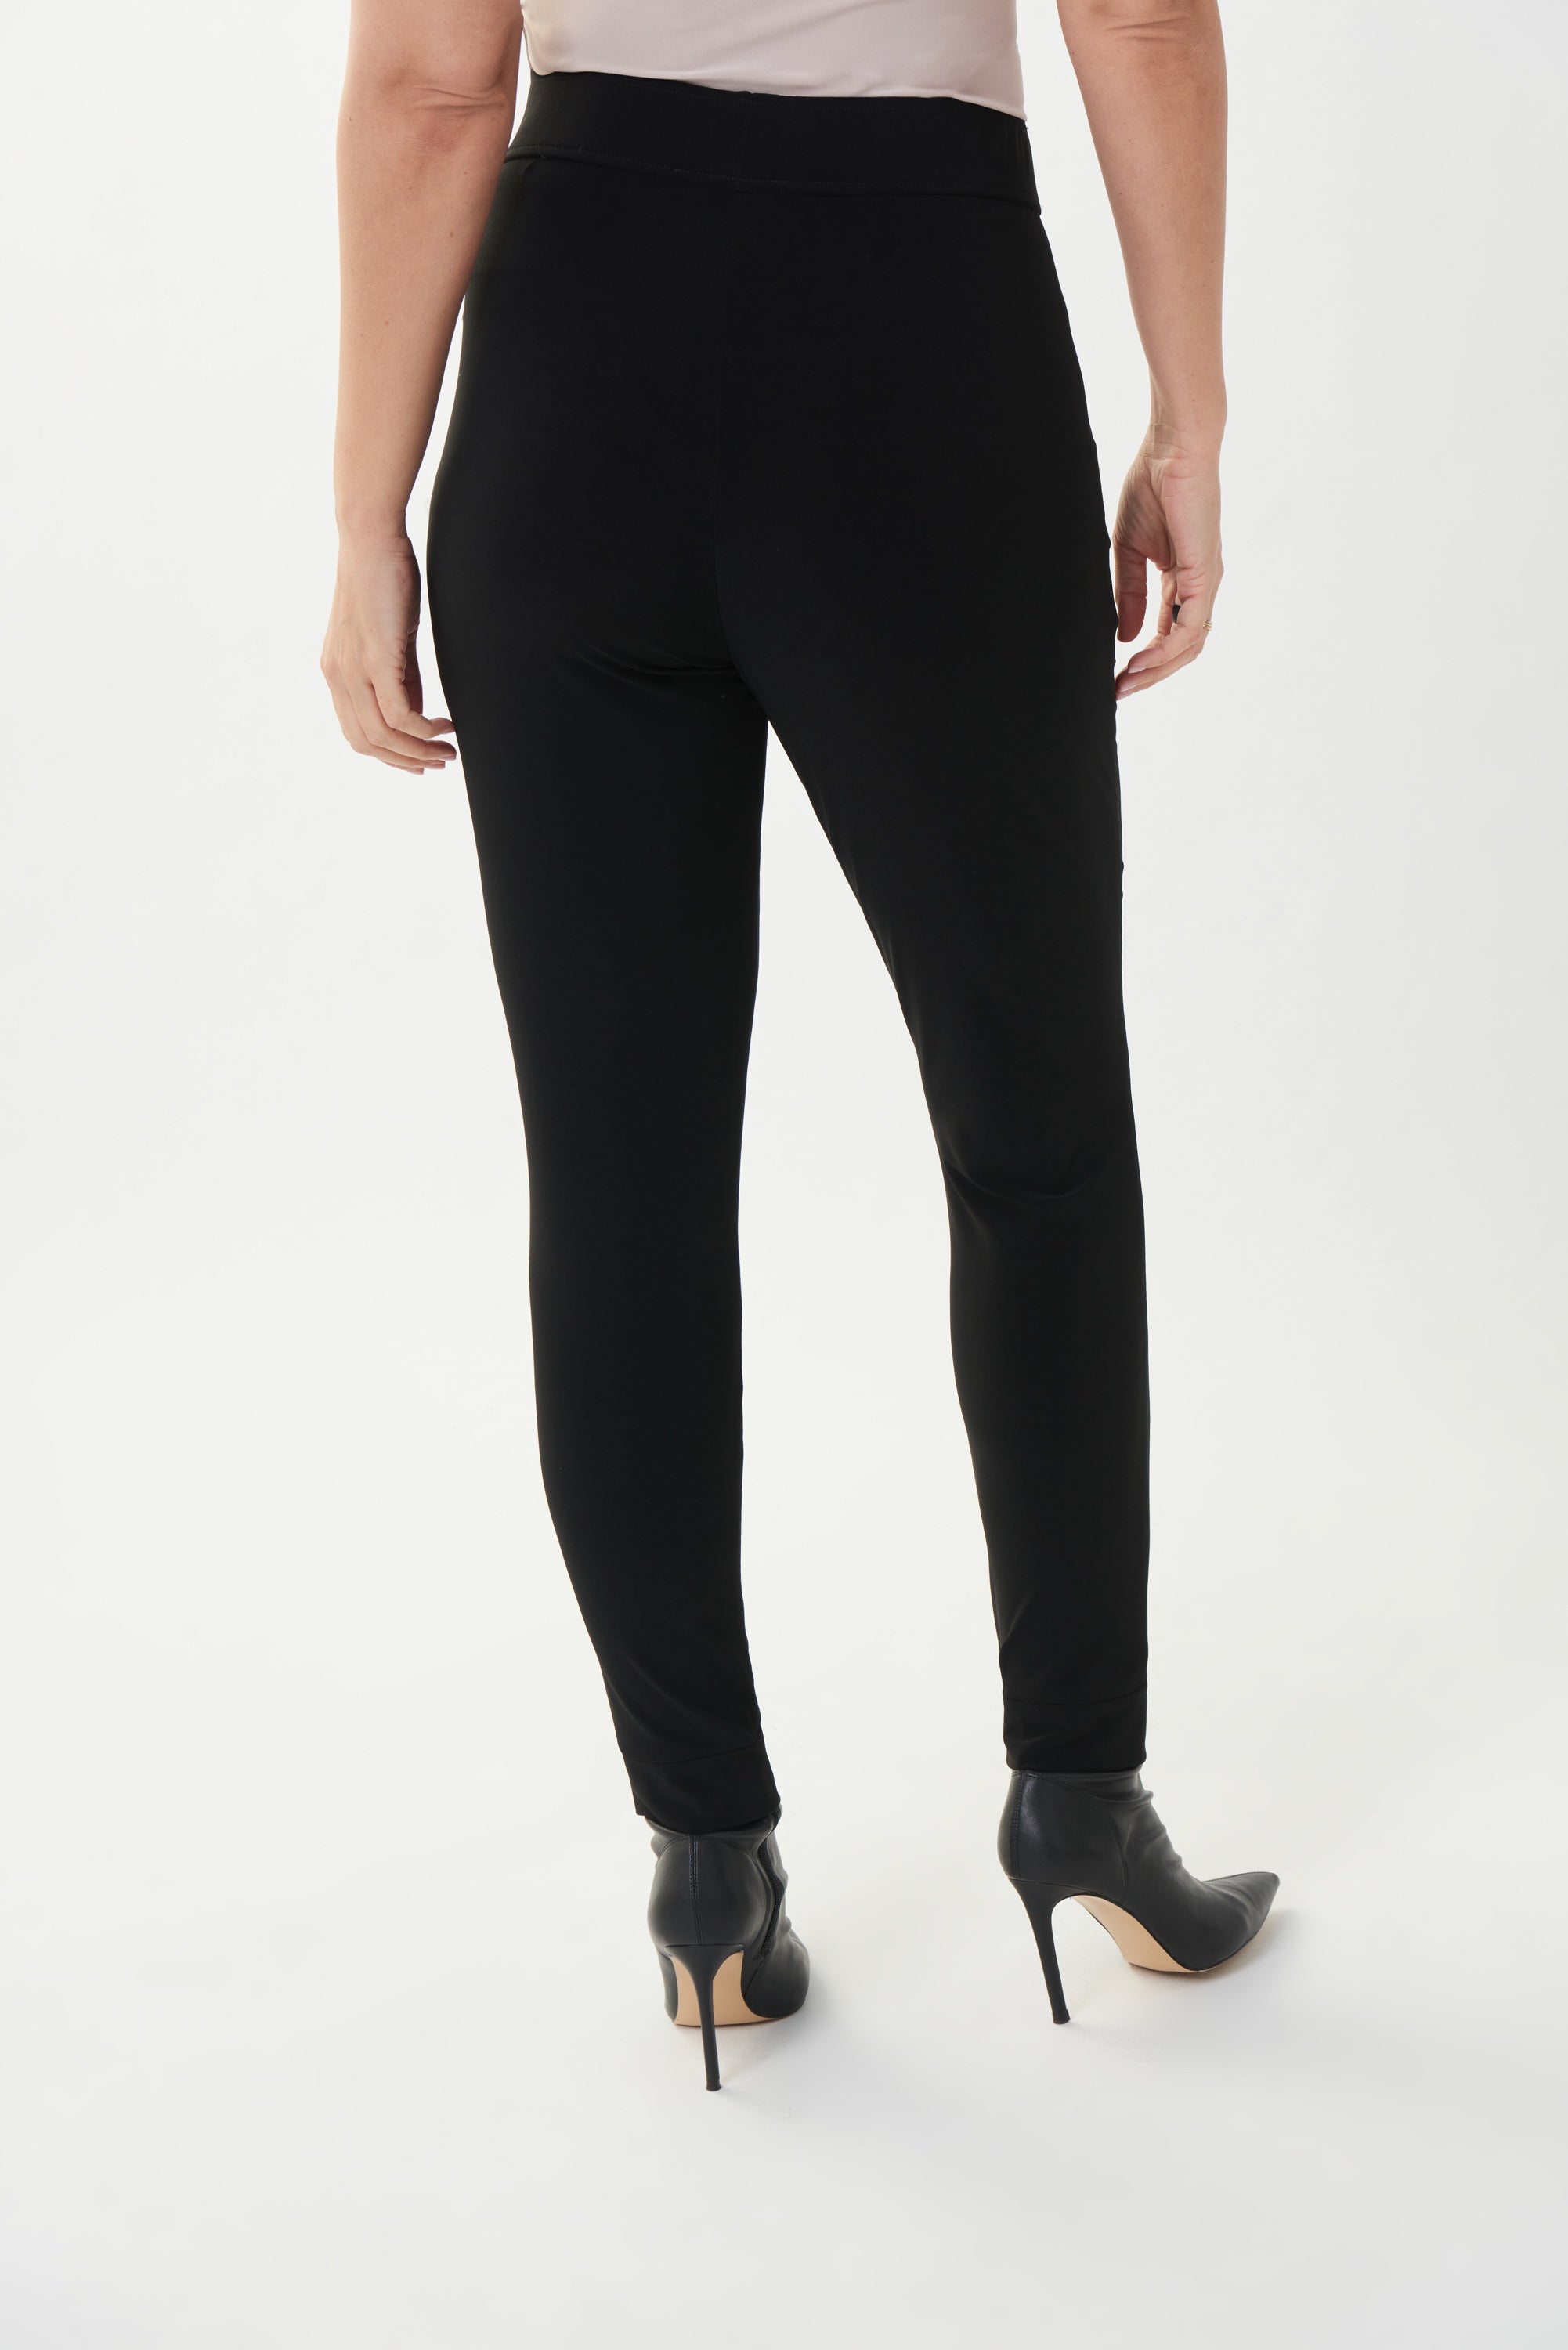 These Joseph Ribkoff Zip Pocket Tie Pants are an easy, comfortable choice for dressing up or down. These have an elastic drawstring waistband, functional angled zip pockets, front seam stitching and are finished with a cuffed jogger style ankle. 